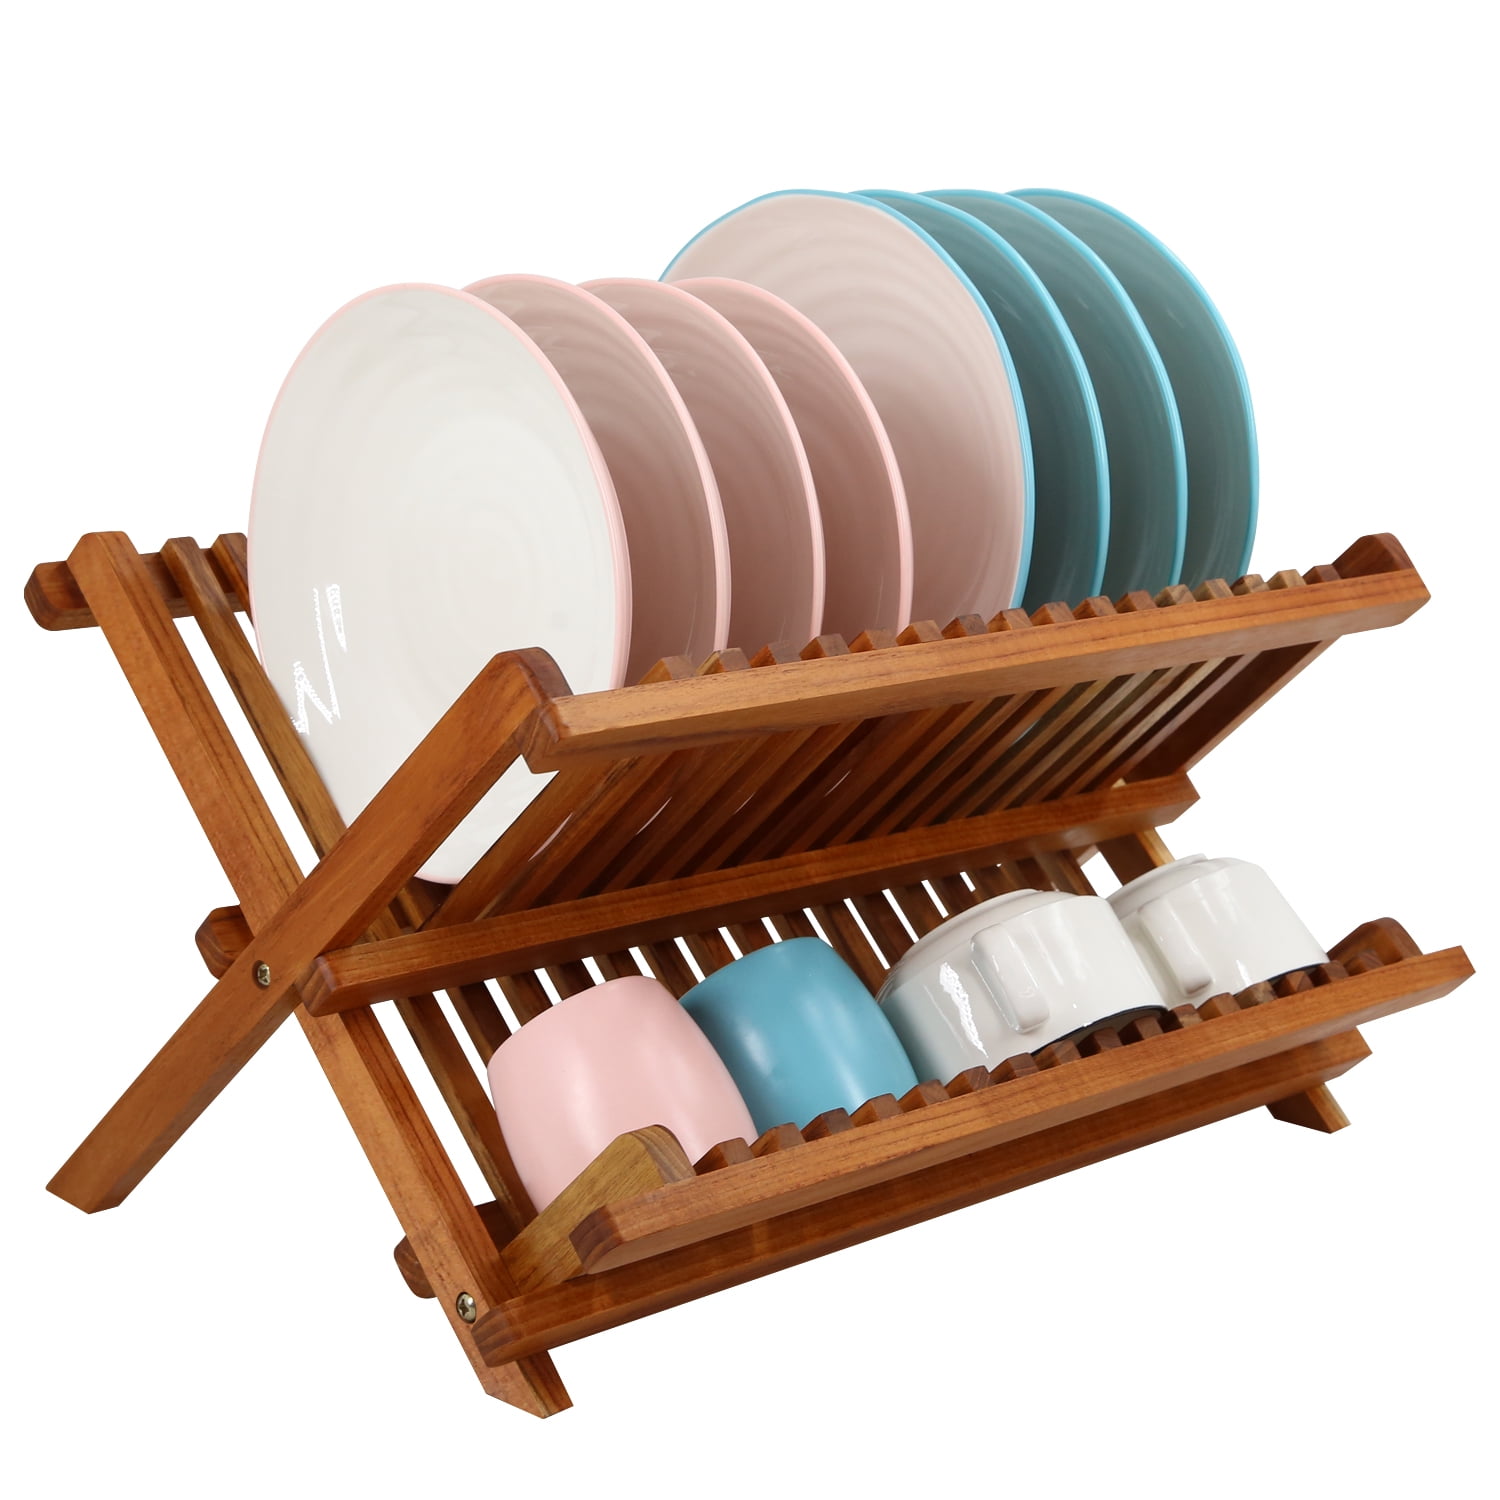  Youeon Foldable Dish Drying Rack with Drip Tray, Stainless  Steel 2 Tier Dish Drainer Rack, Collapsible Dish Drainer, Folding Dish Rack  for Kitchen Sink, Countertop, Cutlery, Plates, Dishes